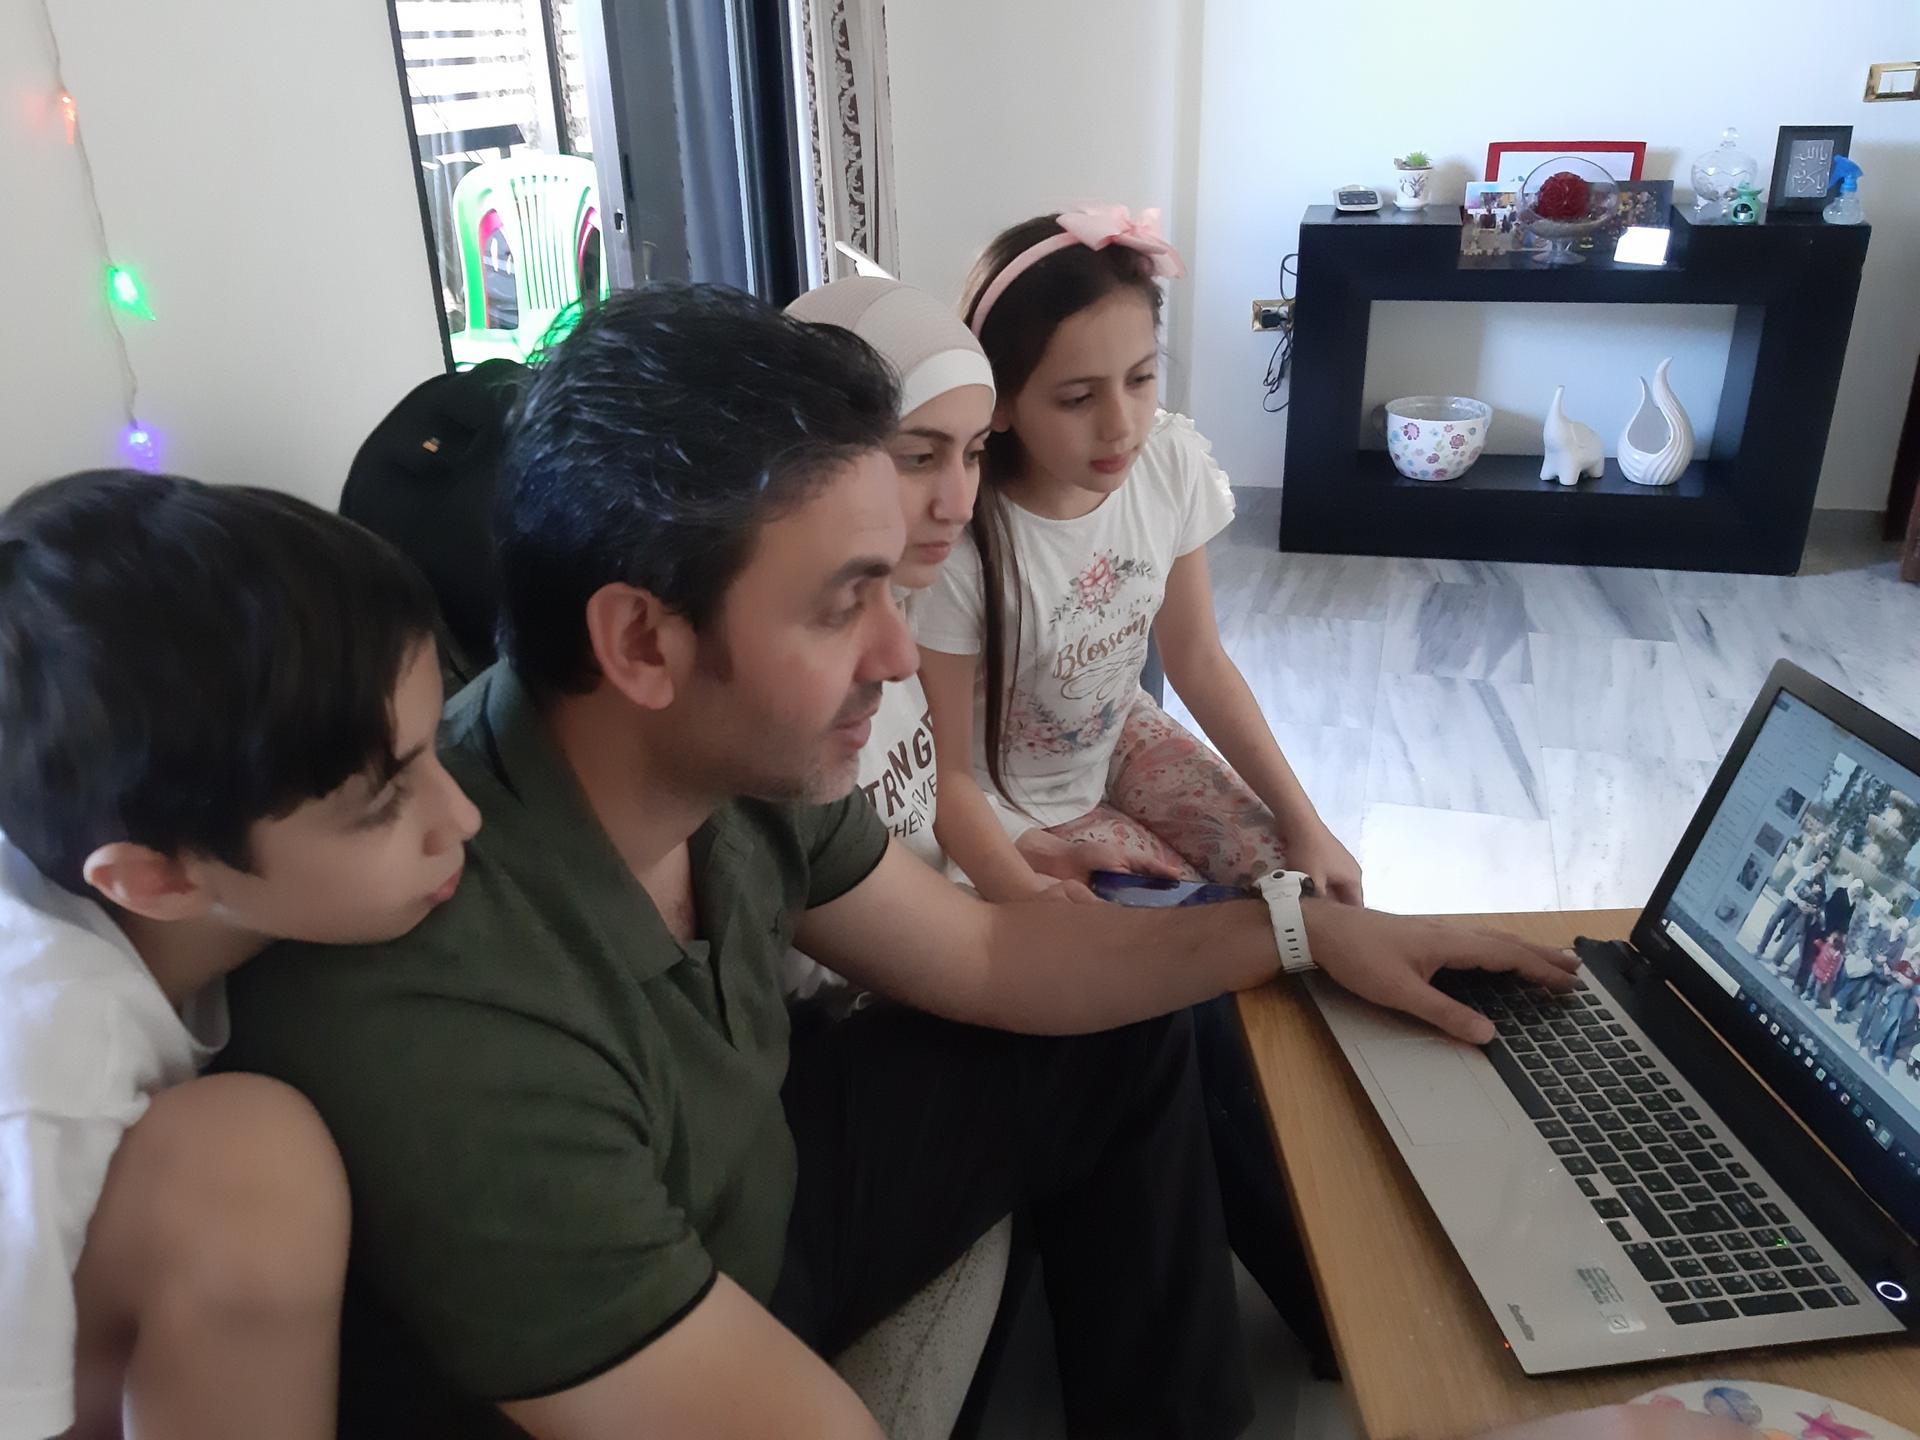 A man looks at photos on a laptop screen with his children